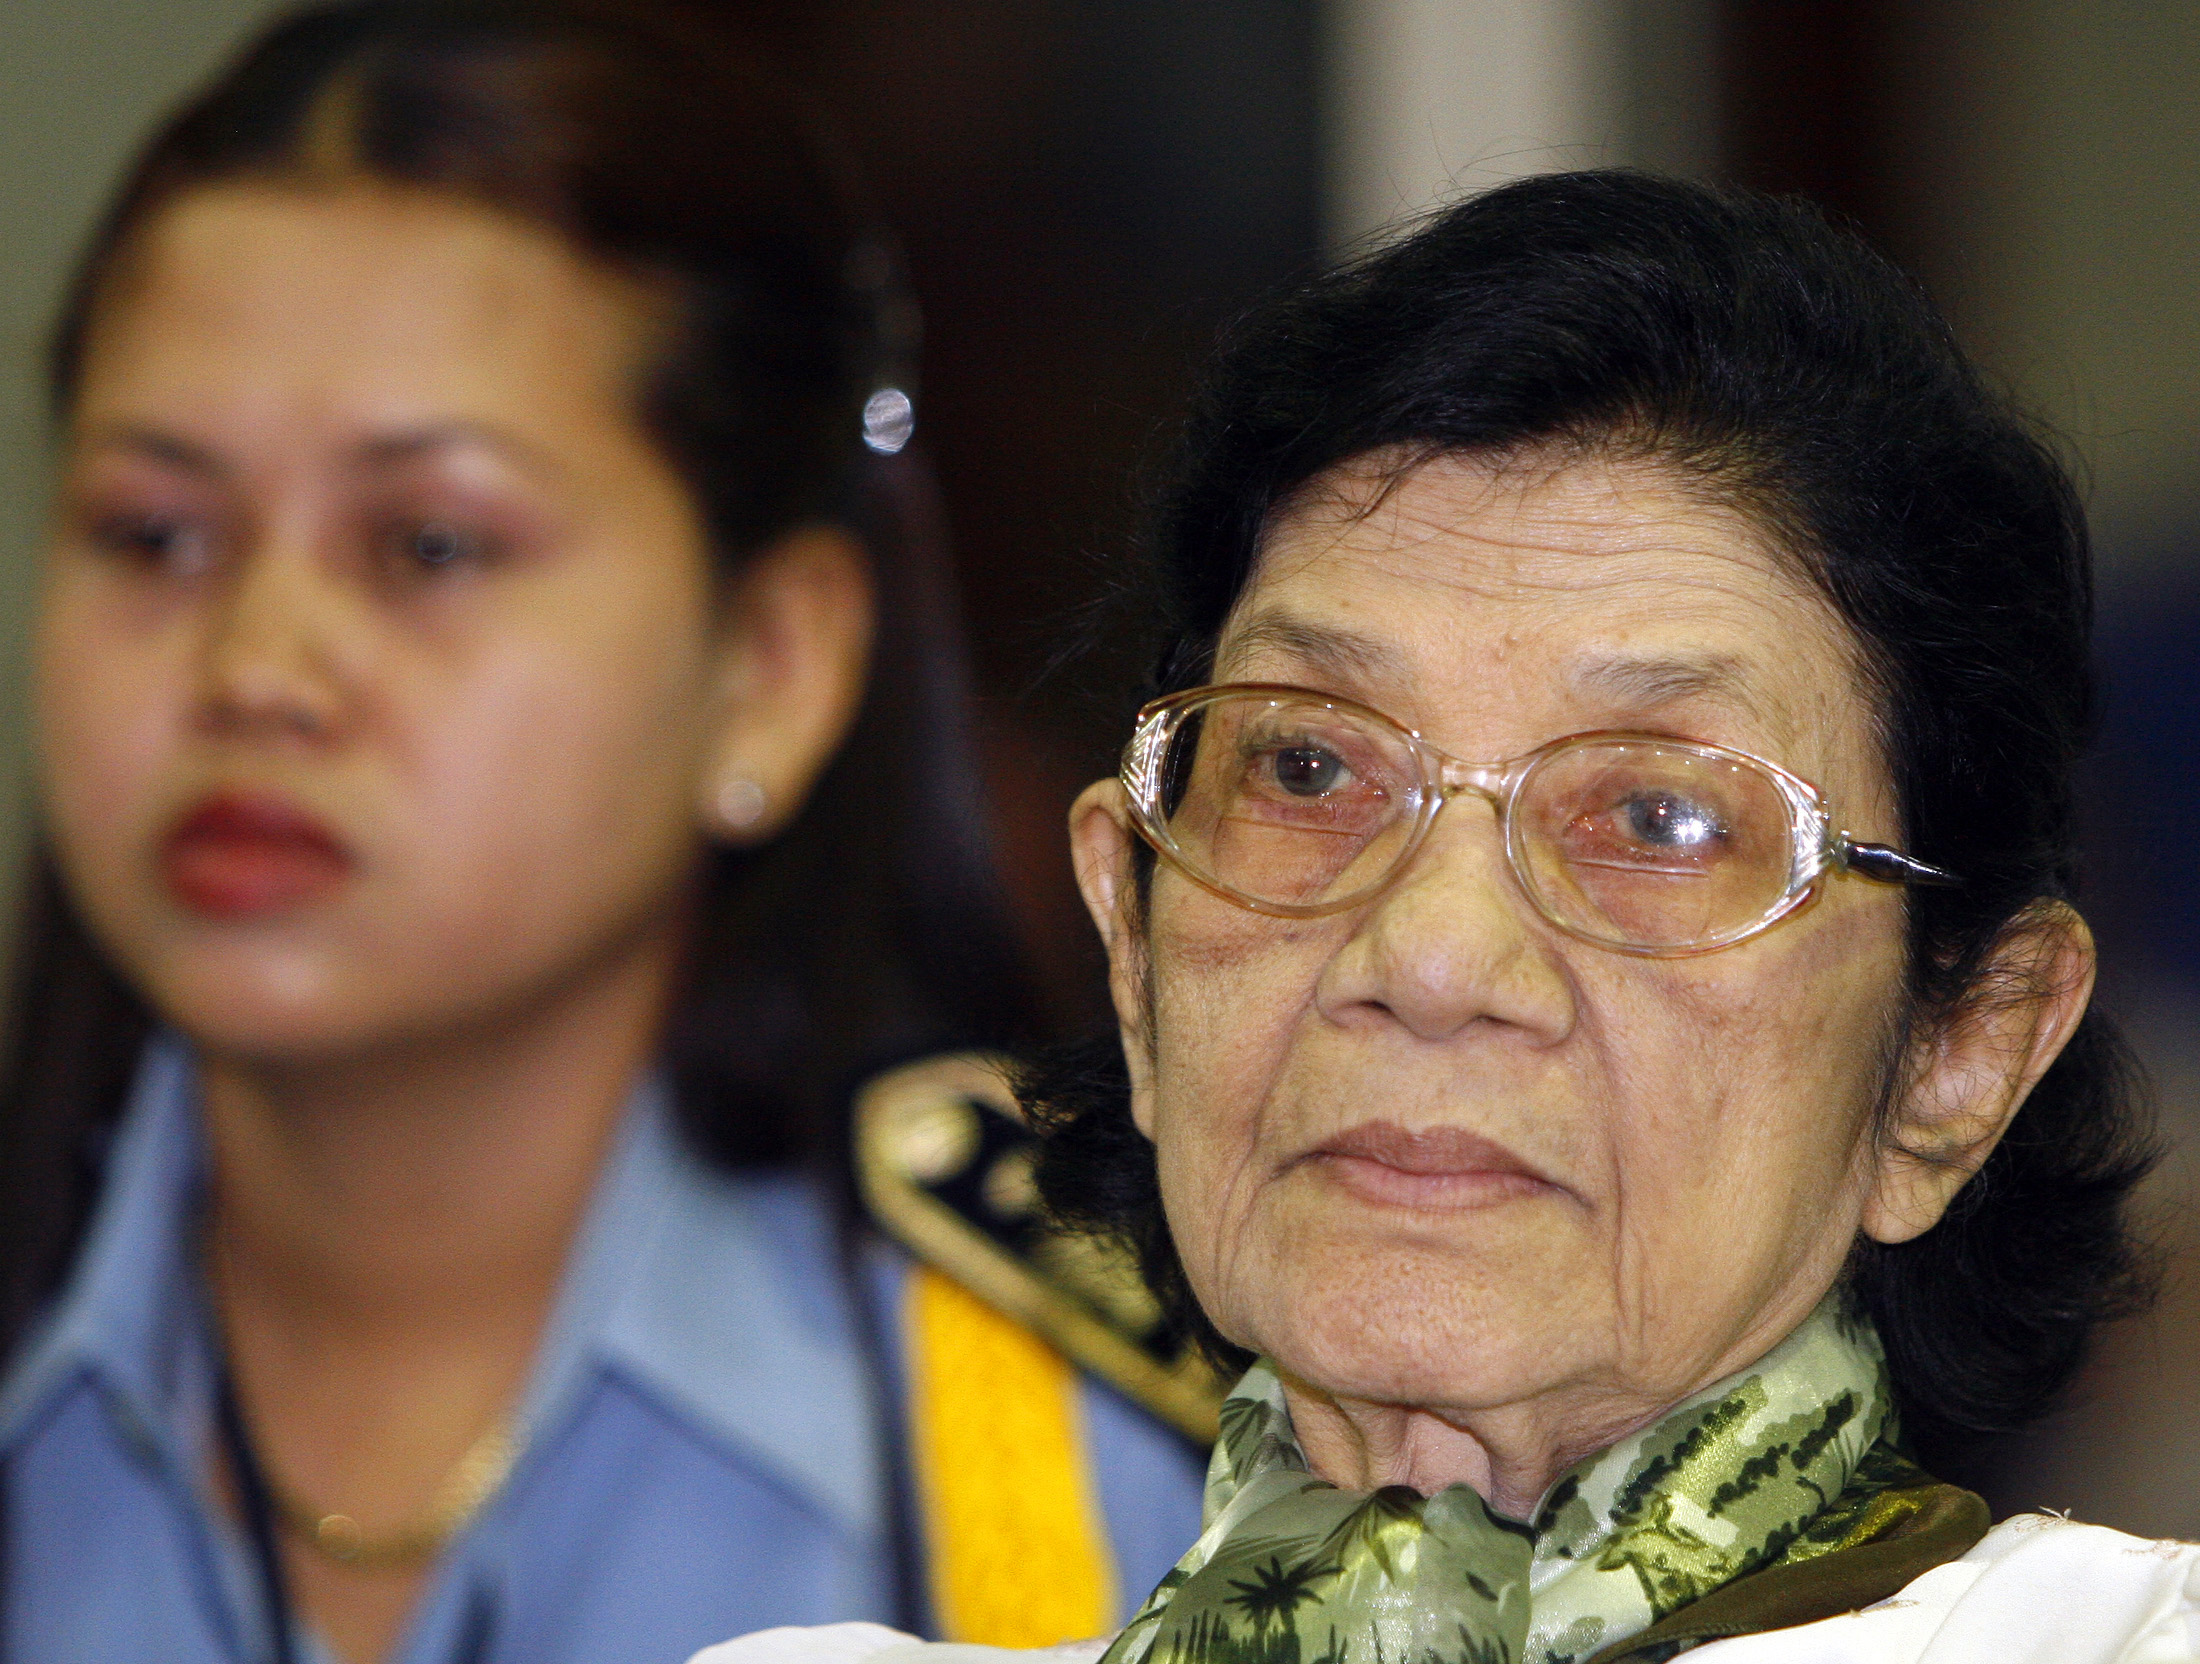 Ieng Thirith, Social Affairs Minister under the Khmer Rouge regime, sits in the dock during her pretrial chamber public hearing at Extraordinary Chambers in the Courts of Cambodia, on the outskirts of Phnom Penh on Feb. 24, 2009 (Reuters)